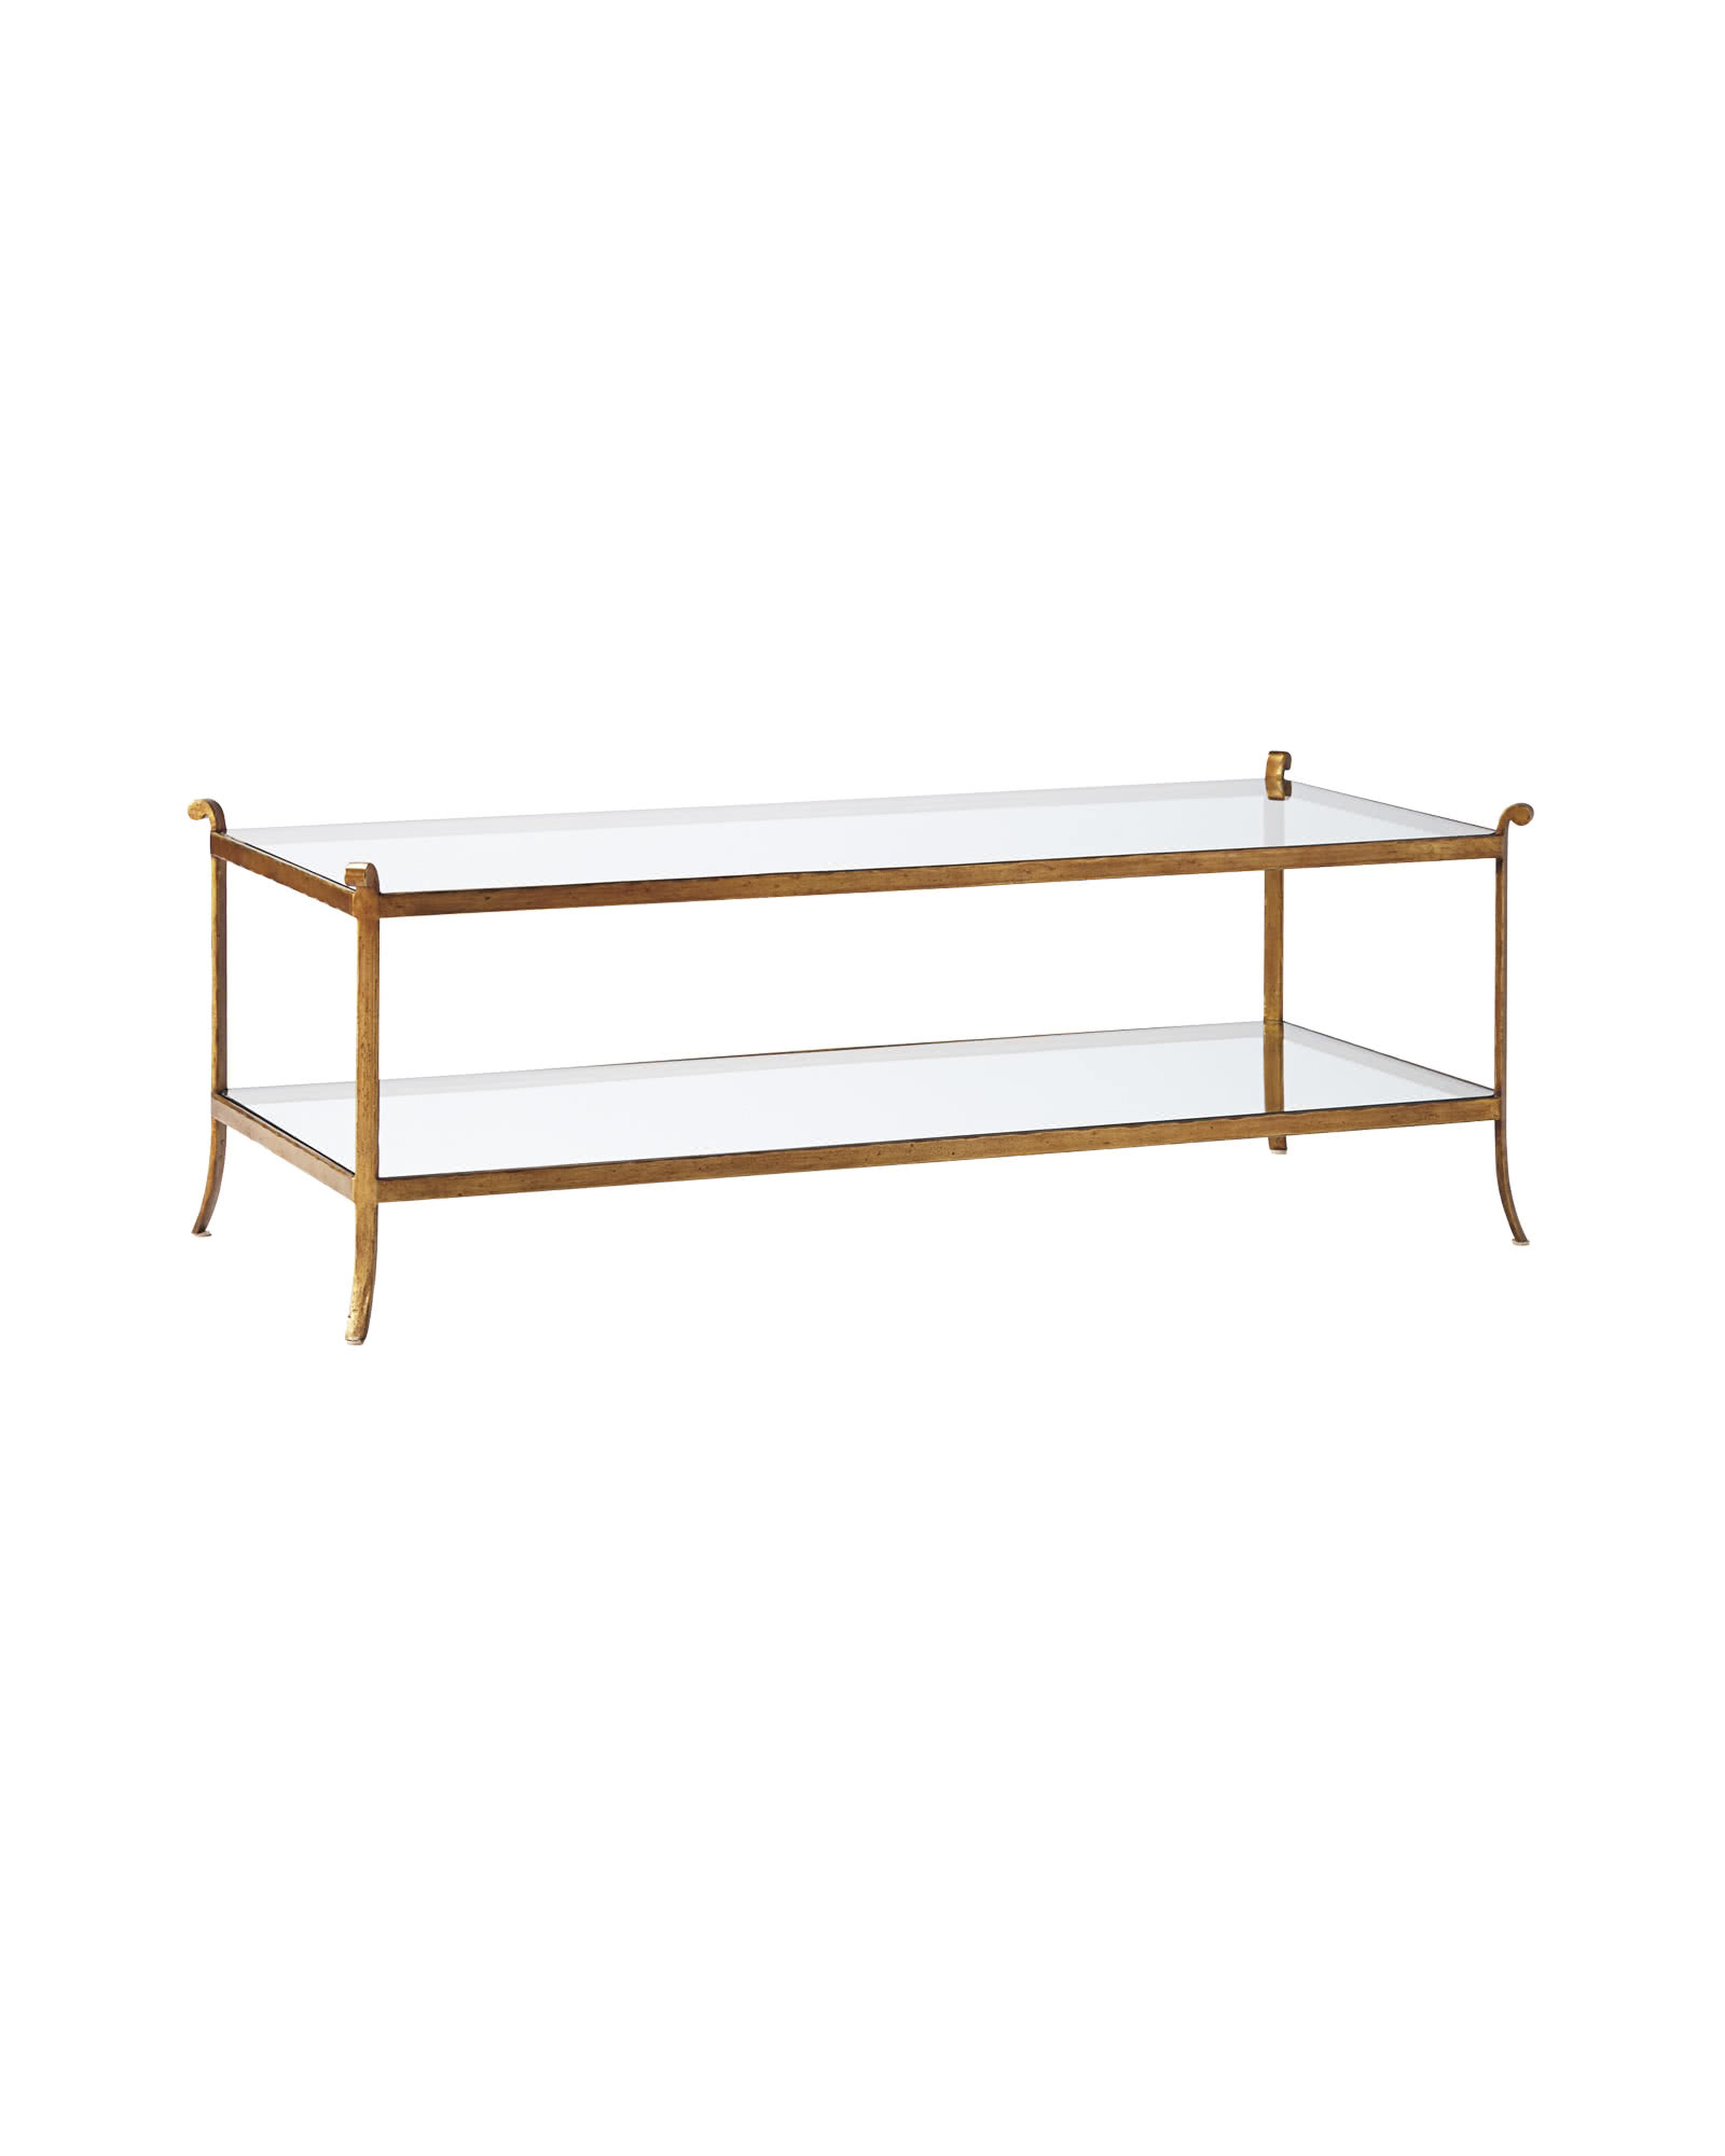 St. Germain Glass Coffee Table - Serena and Lily